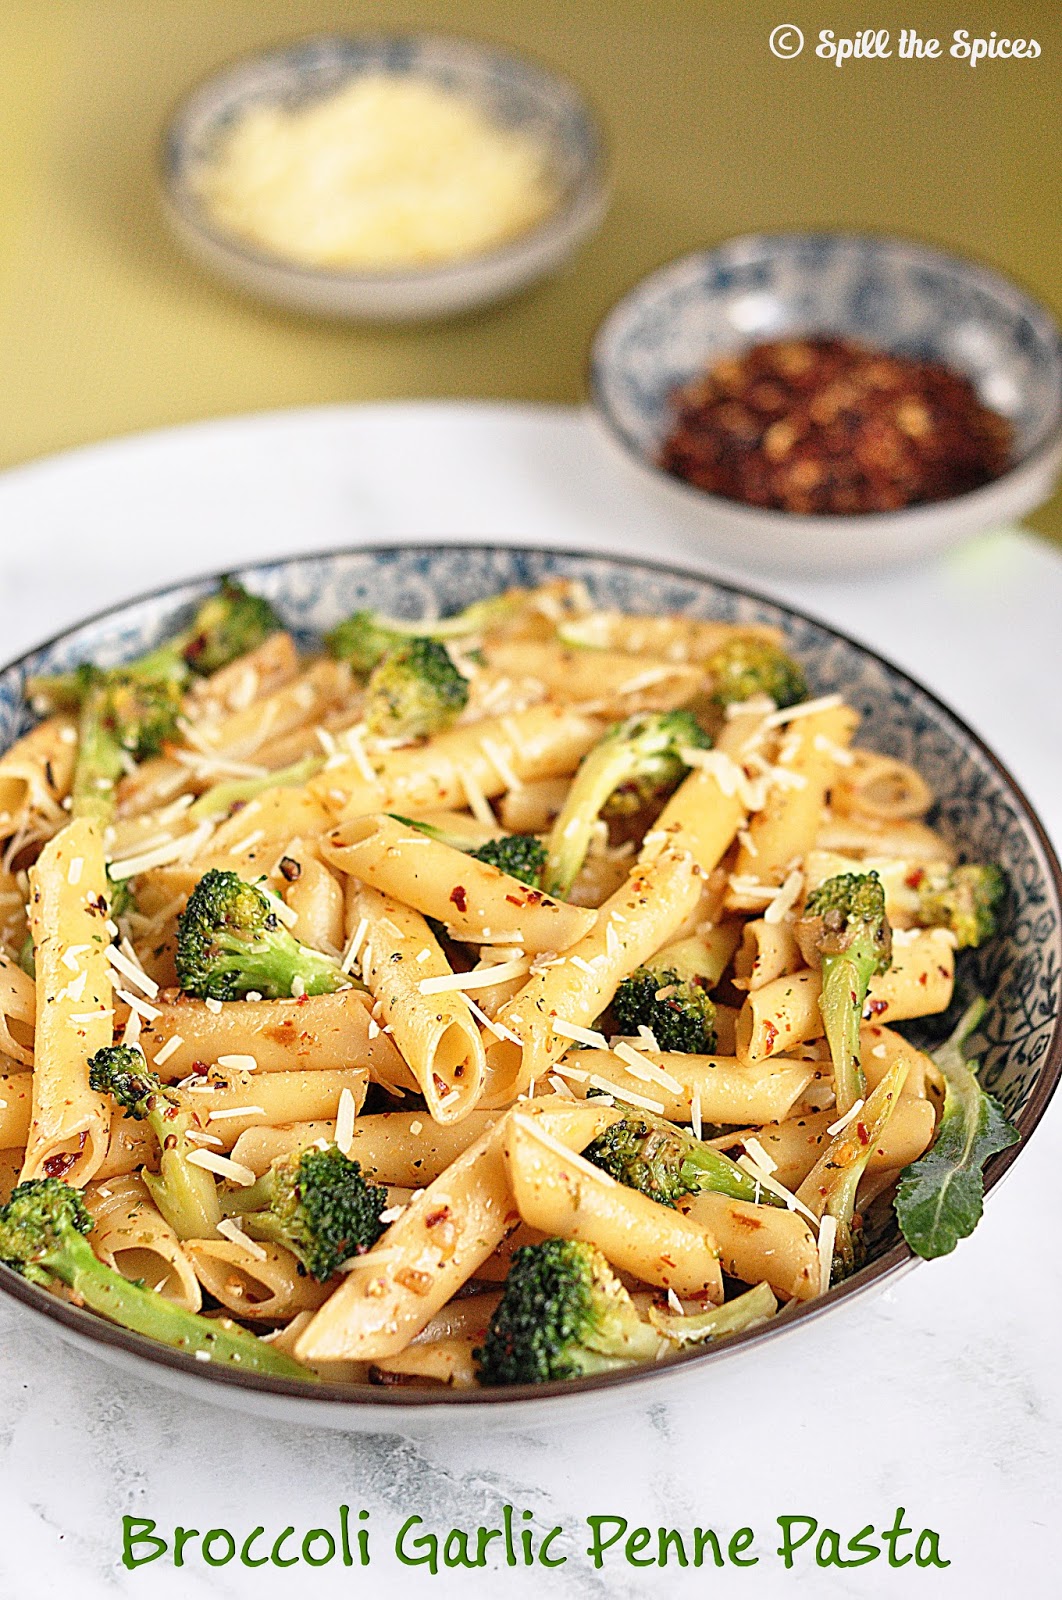 Broccoli Garlic Penne Pasta | Spill the Spices